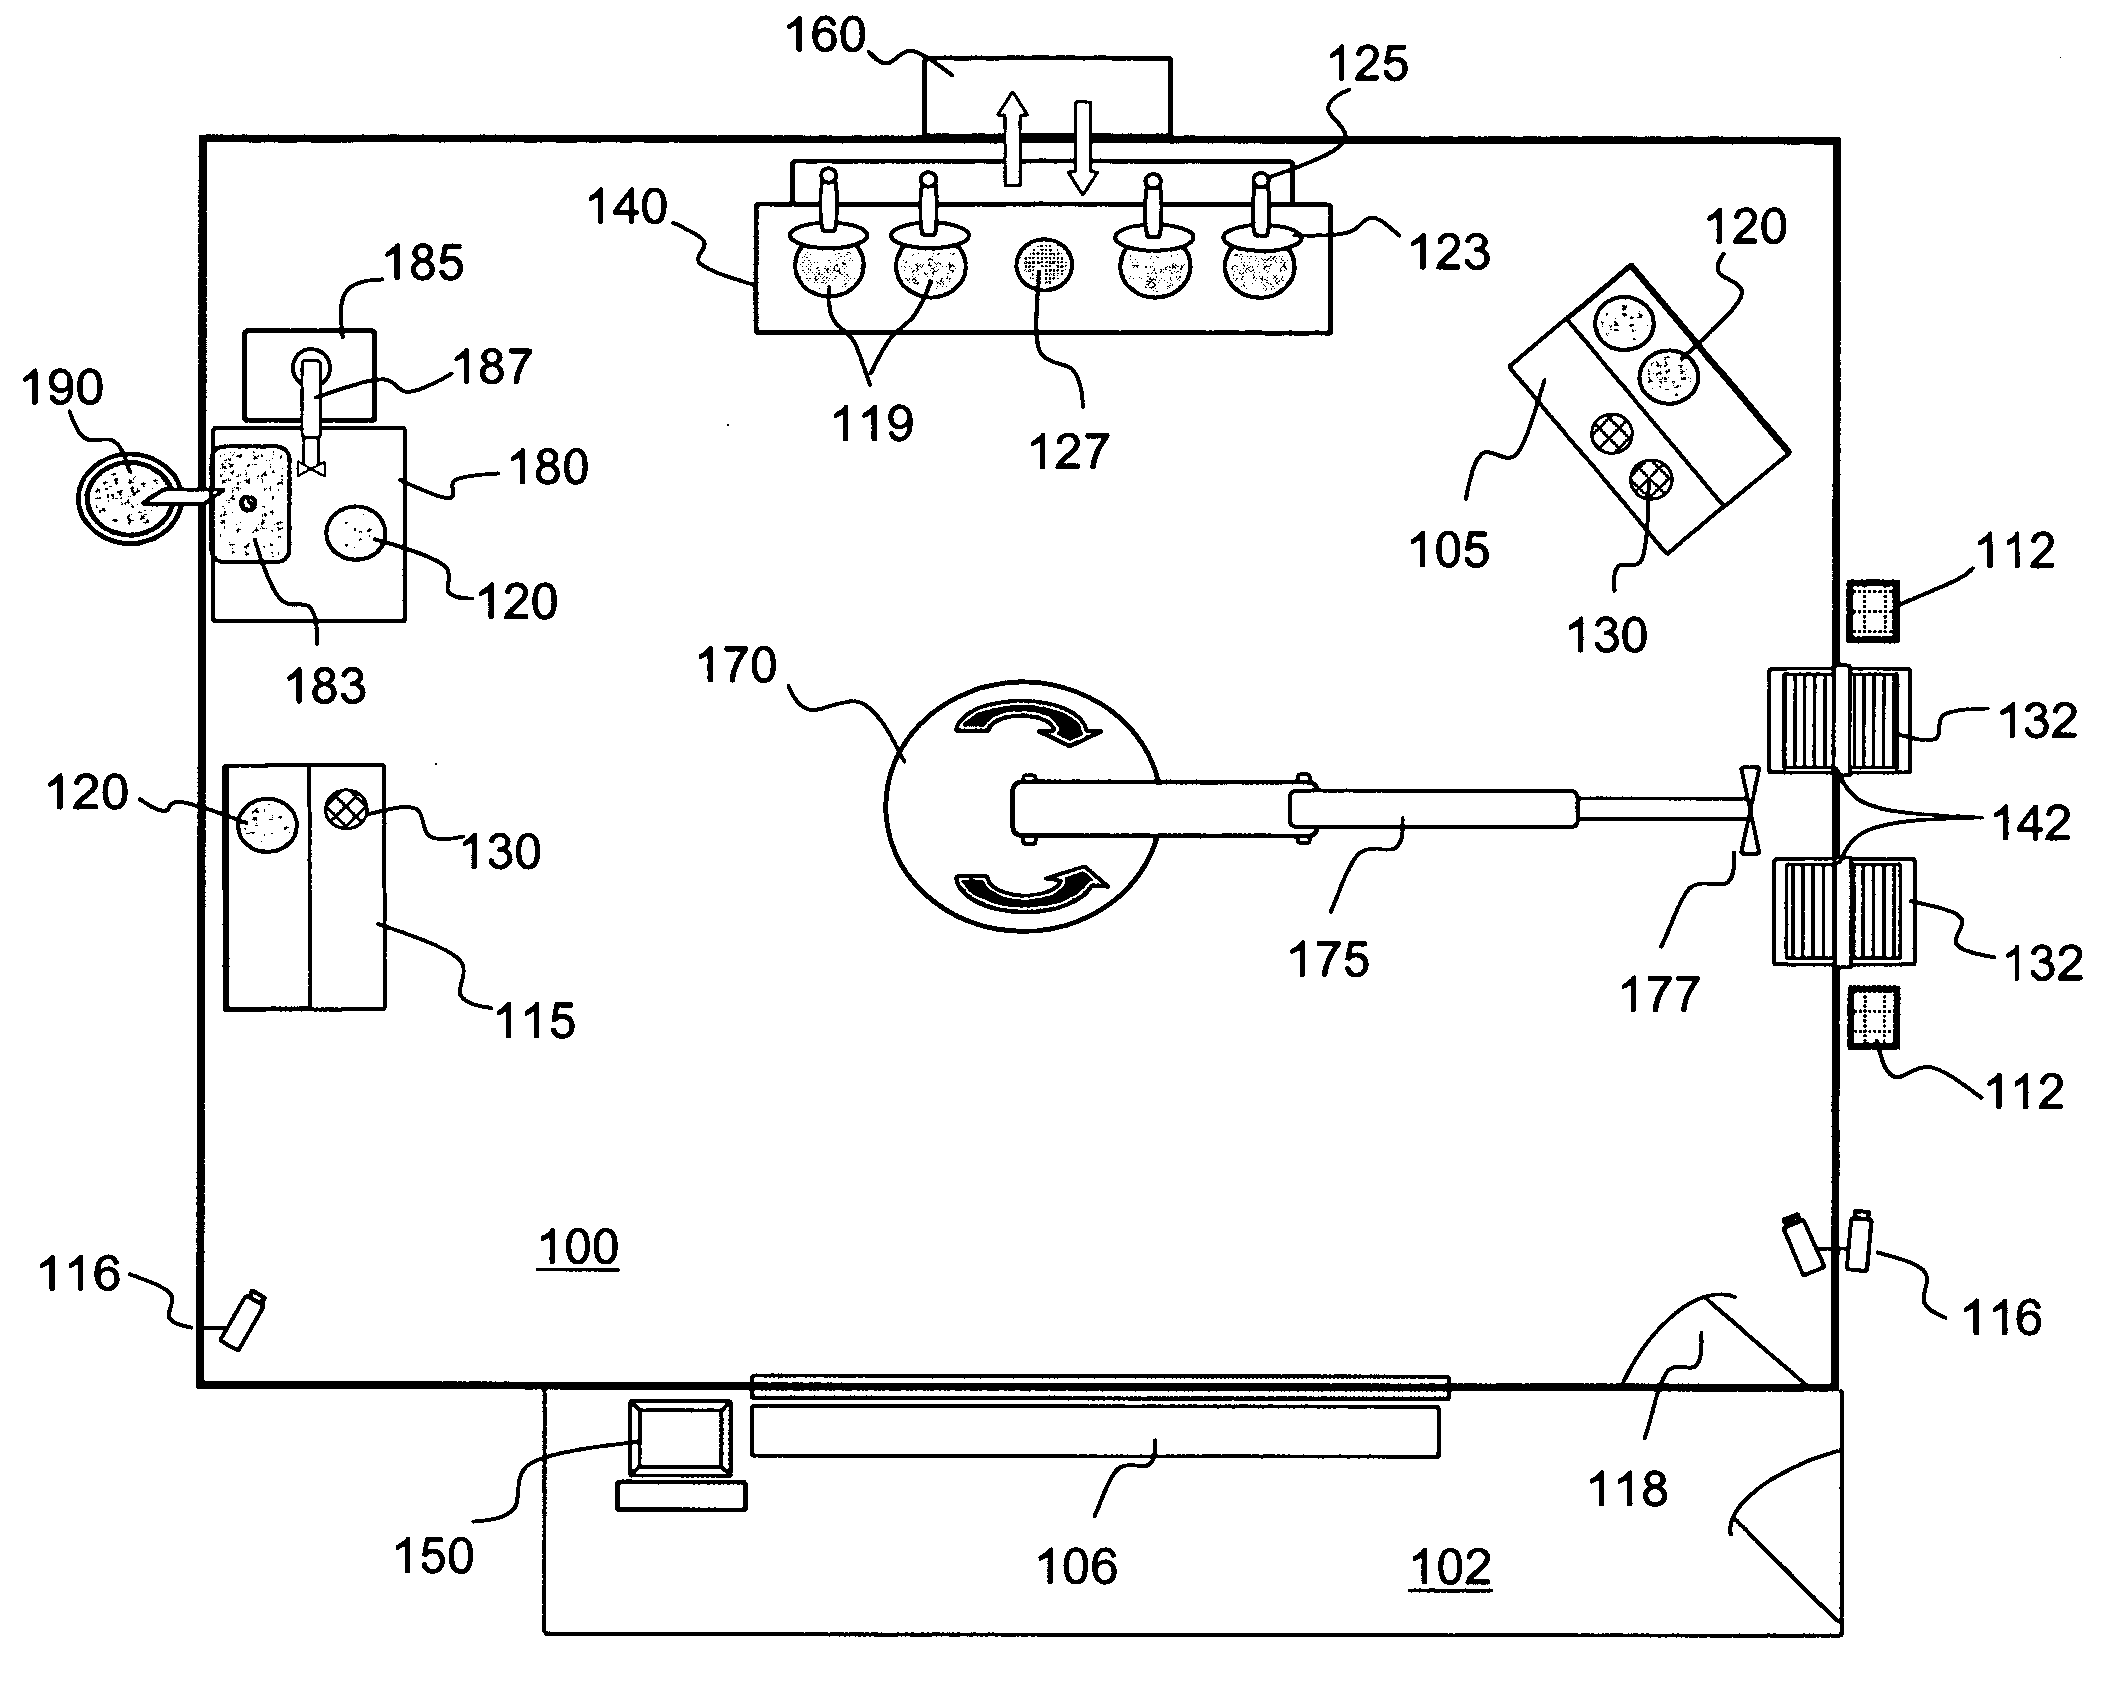 Automated mineral processing systems and methods